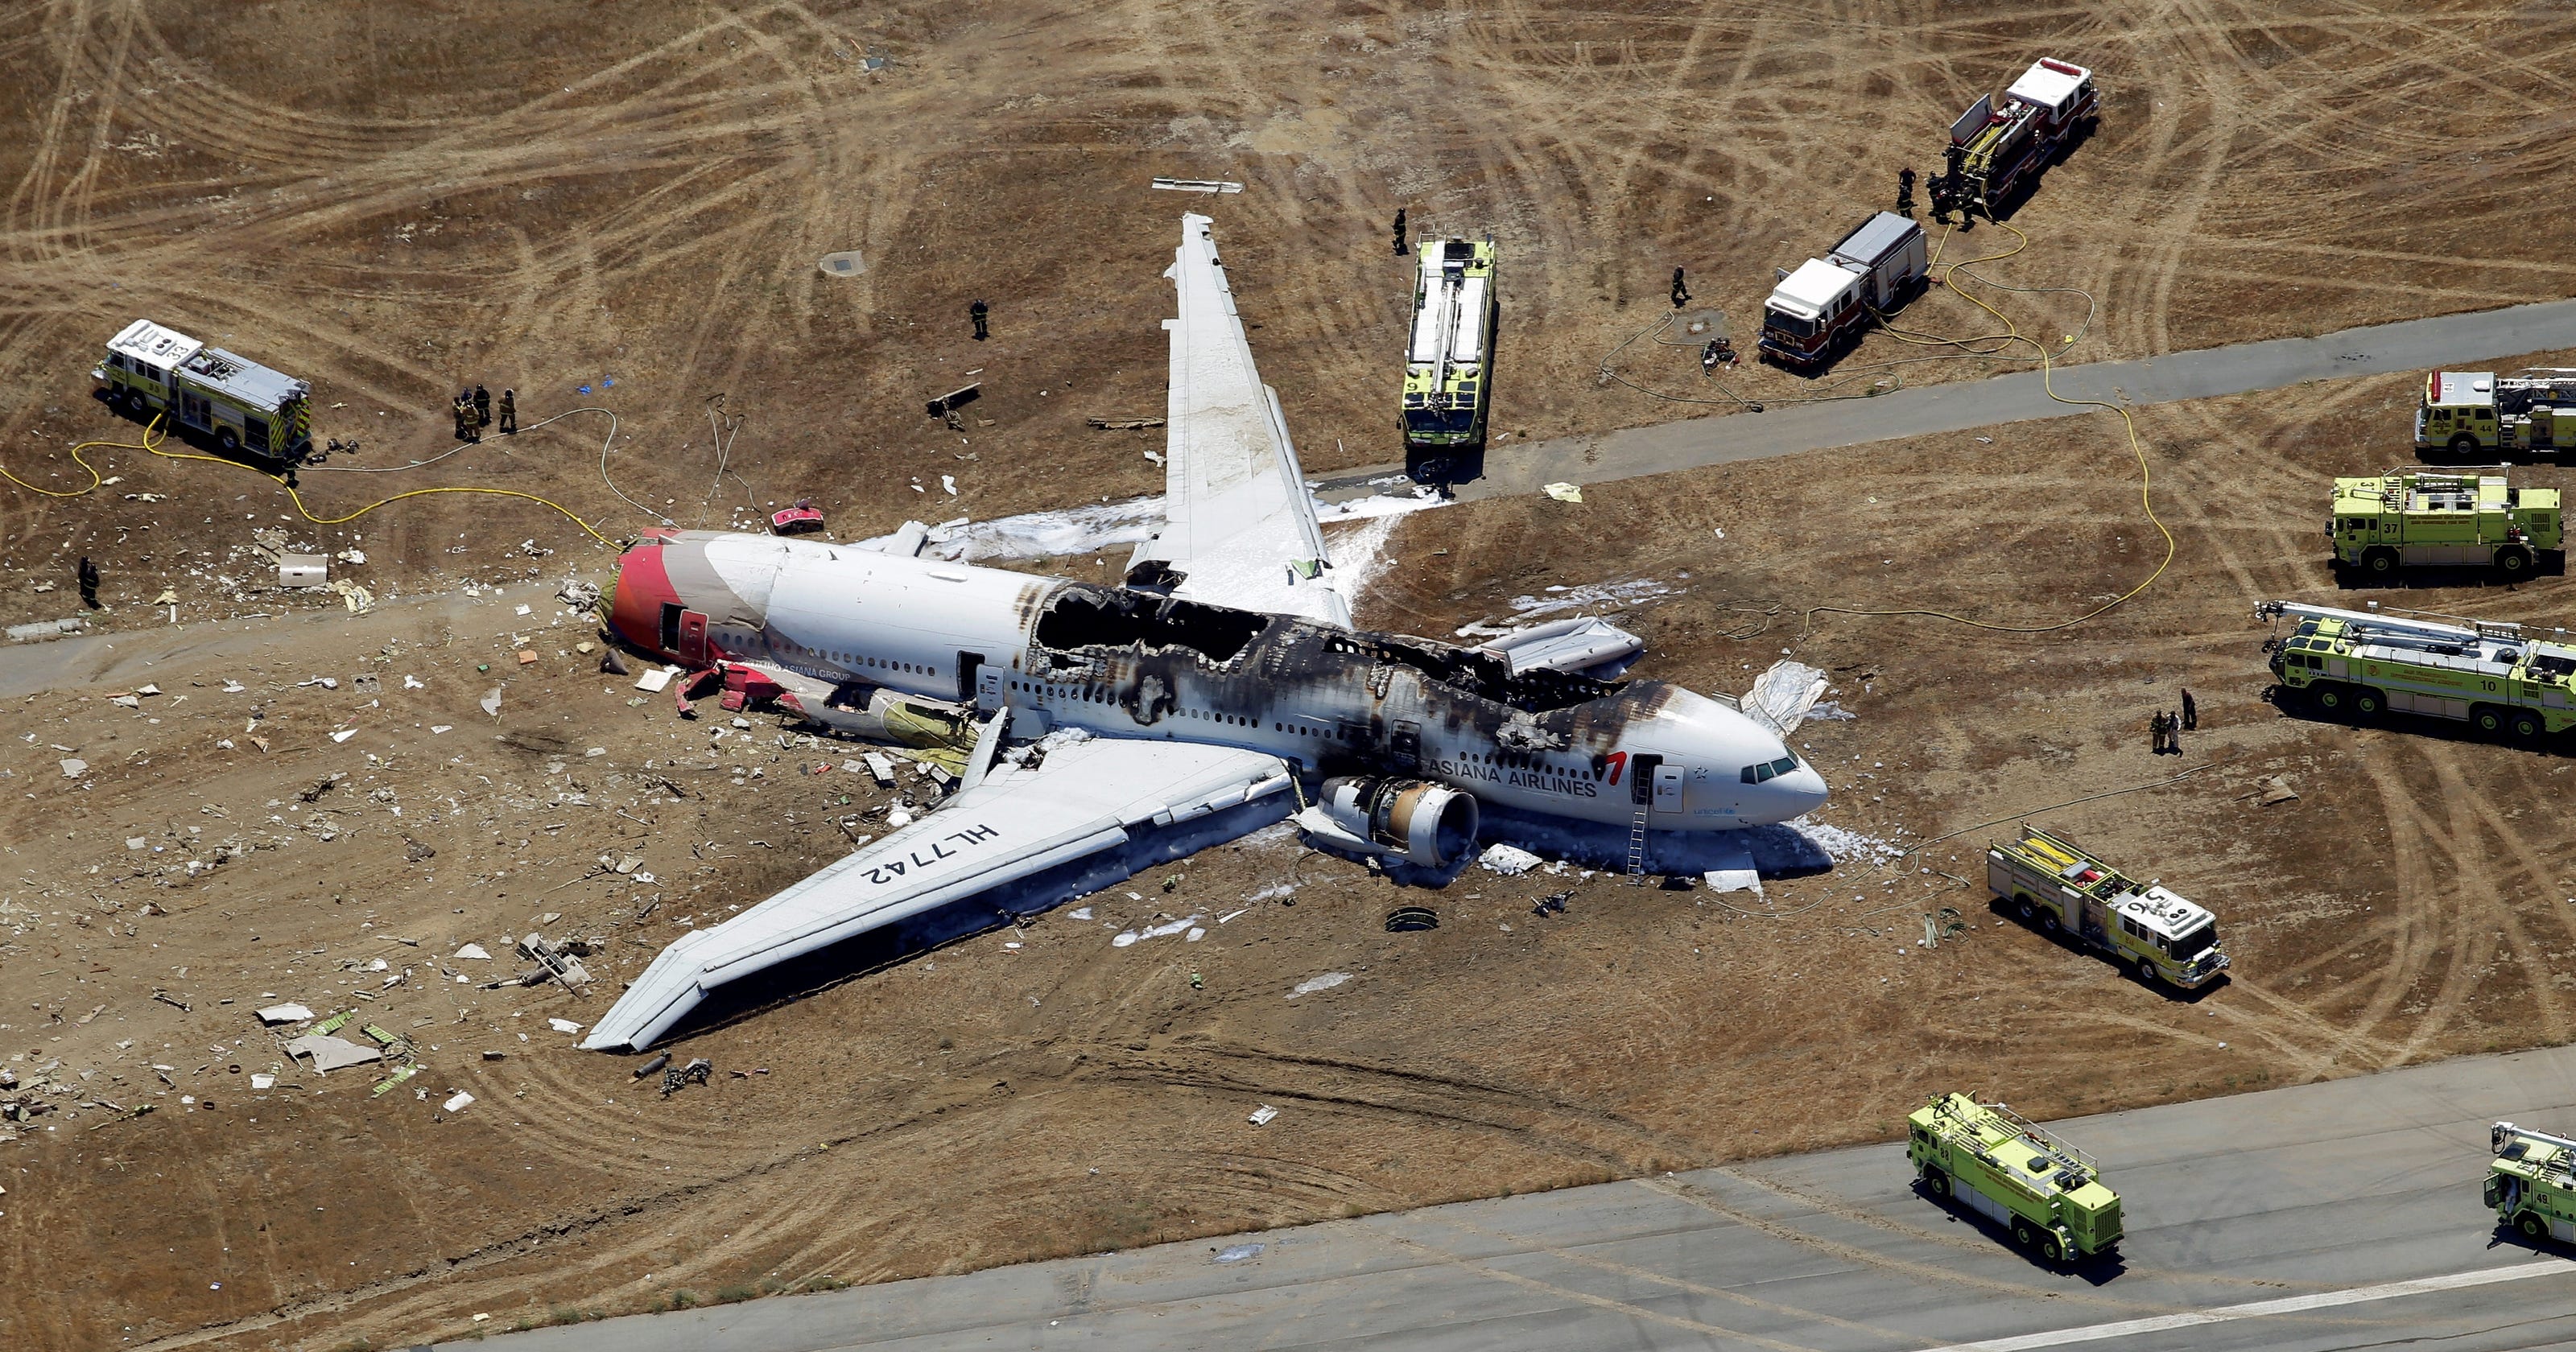 Law firm says it's suing Boeing over Asiana crash